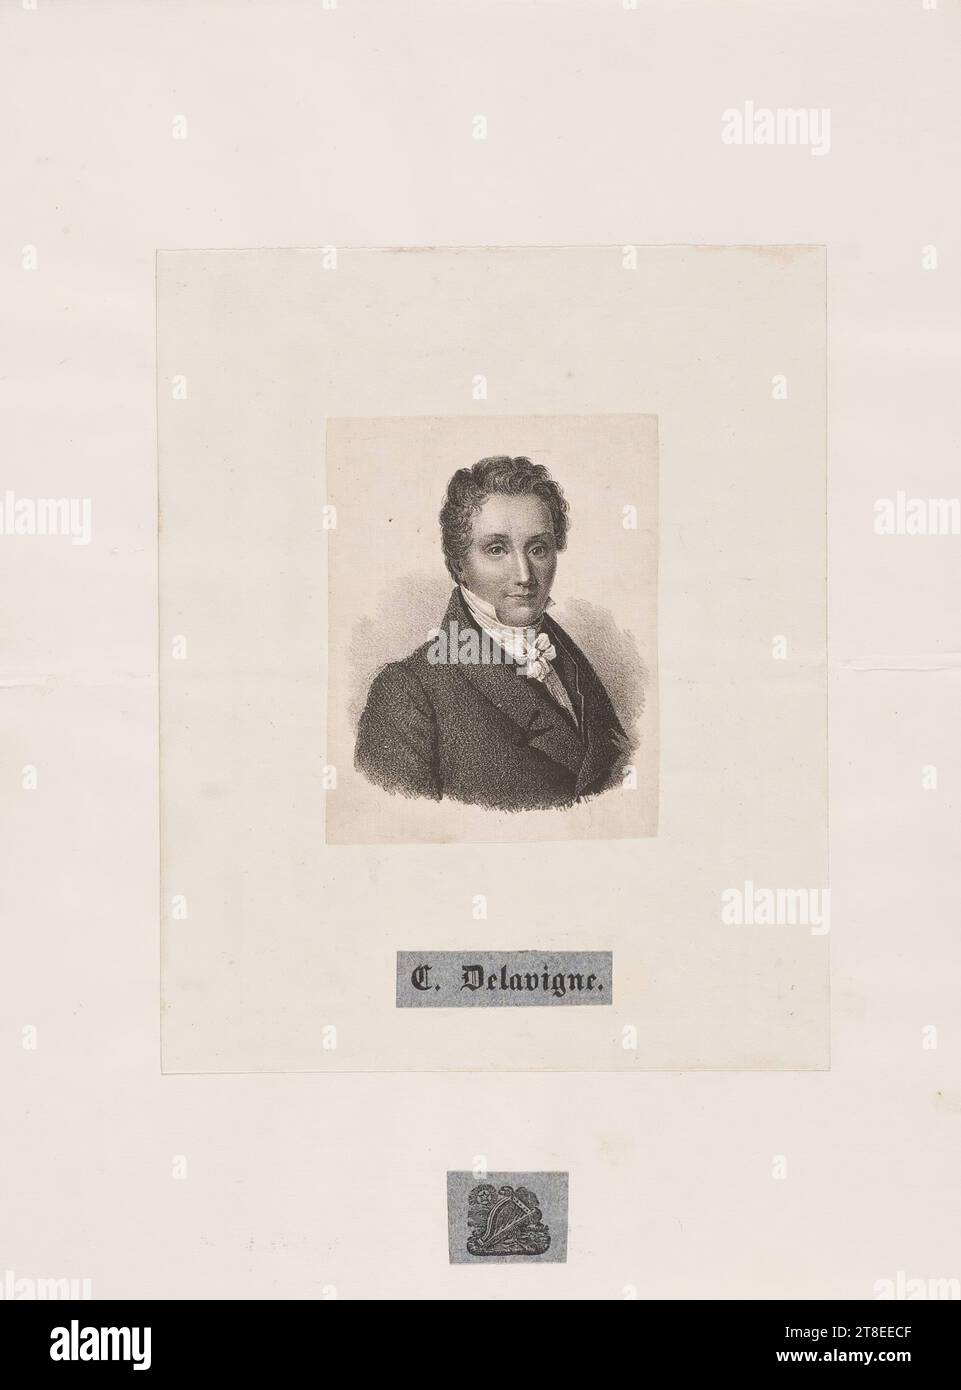 graphic artist possibly J. Sturm (1829). the print is cut out, representation and inscription are separate. C. Delavigne Stock Photo